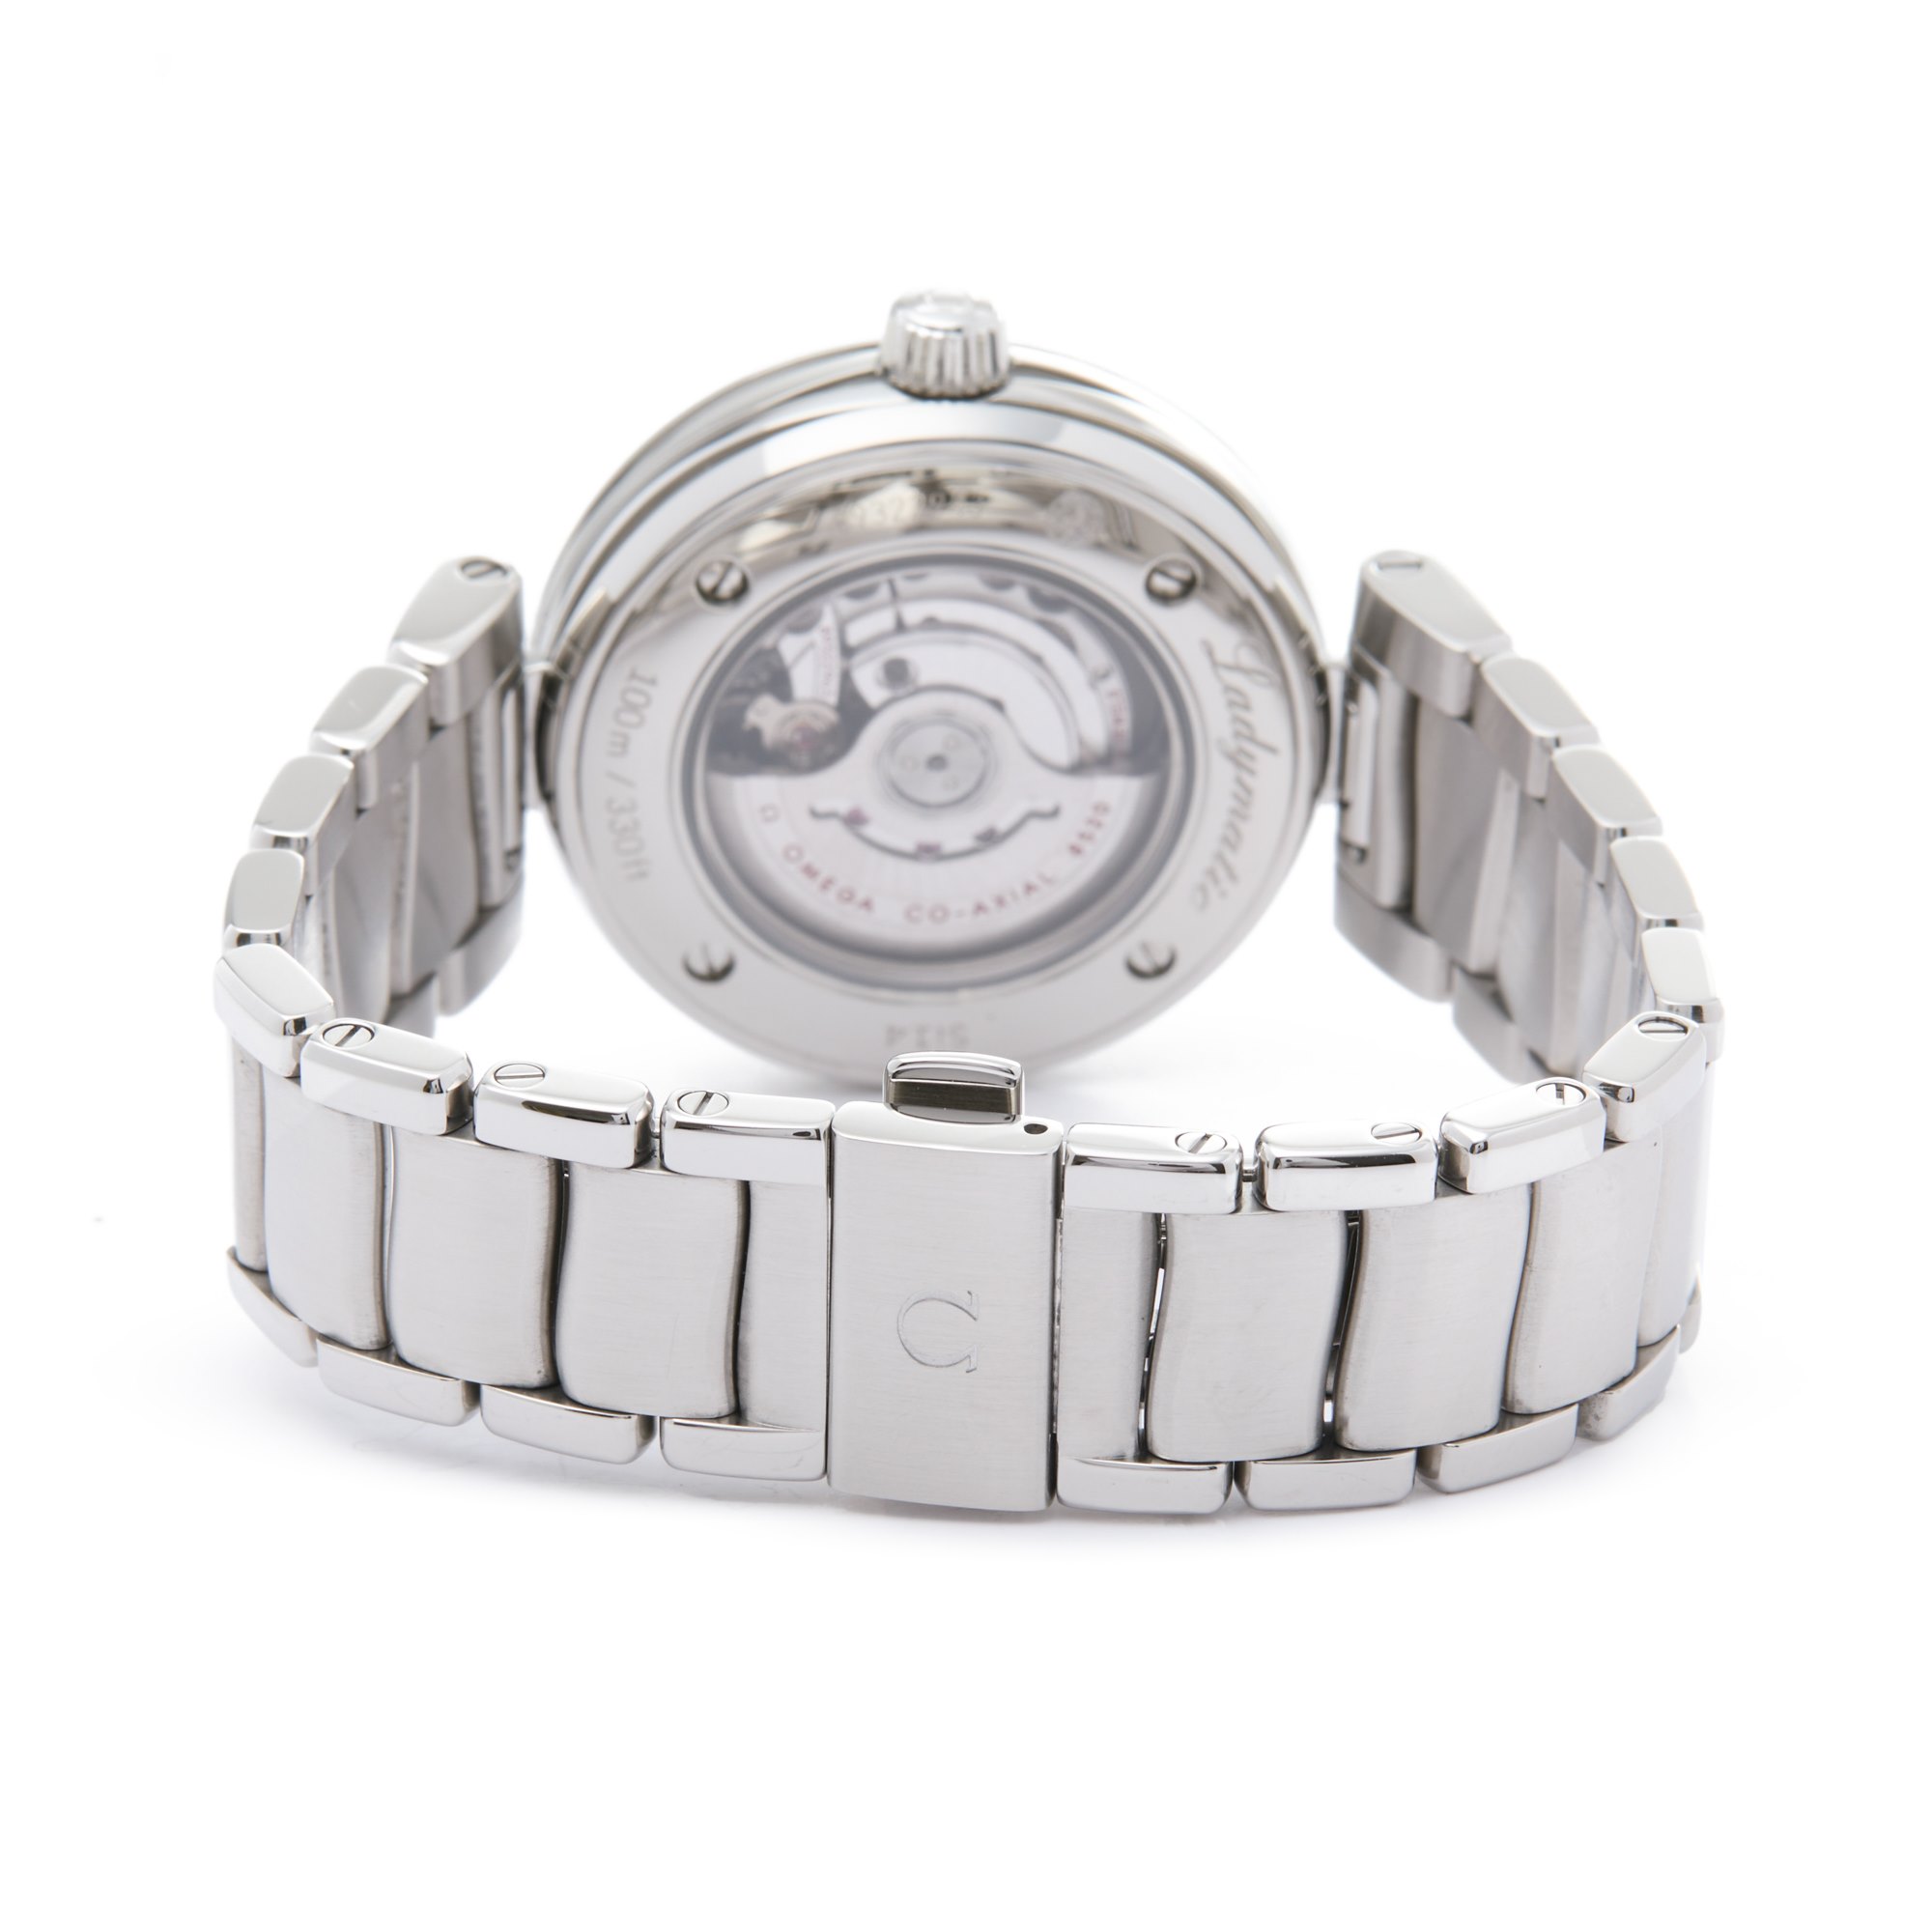 Omega De Ville Ladymatic Stainless Steel 425.30.34.20.55.002